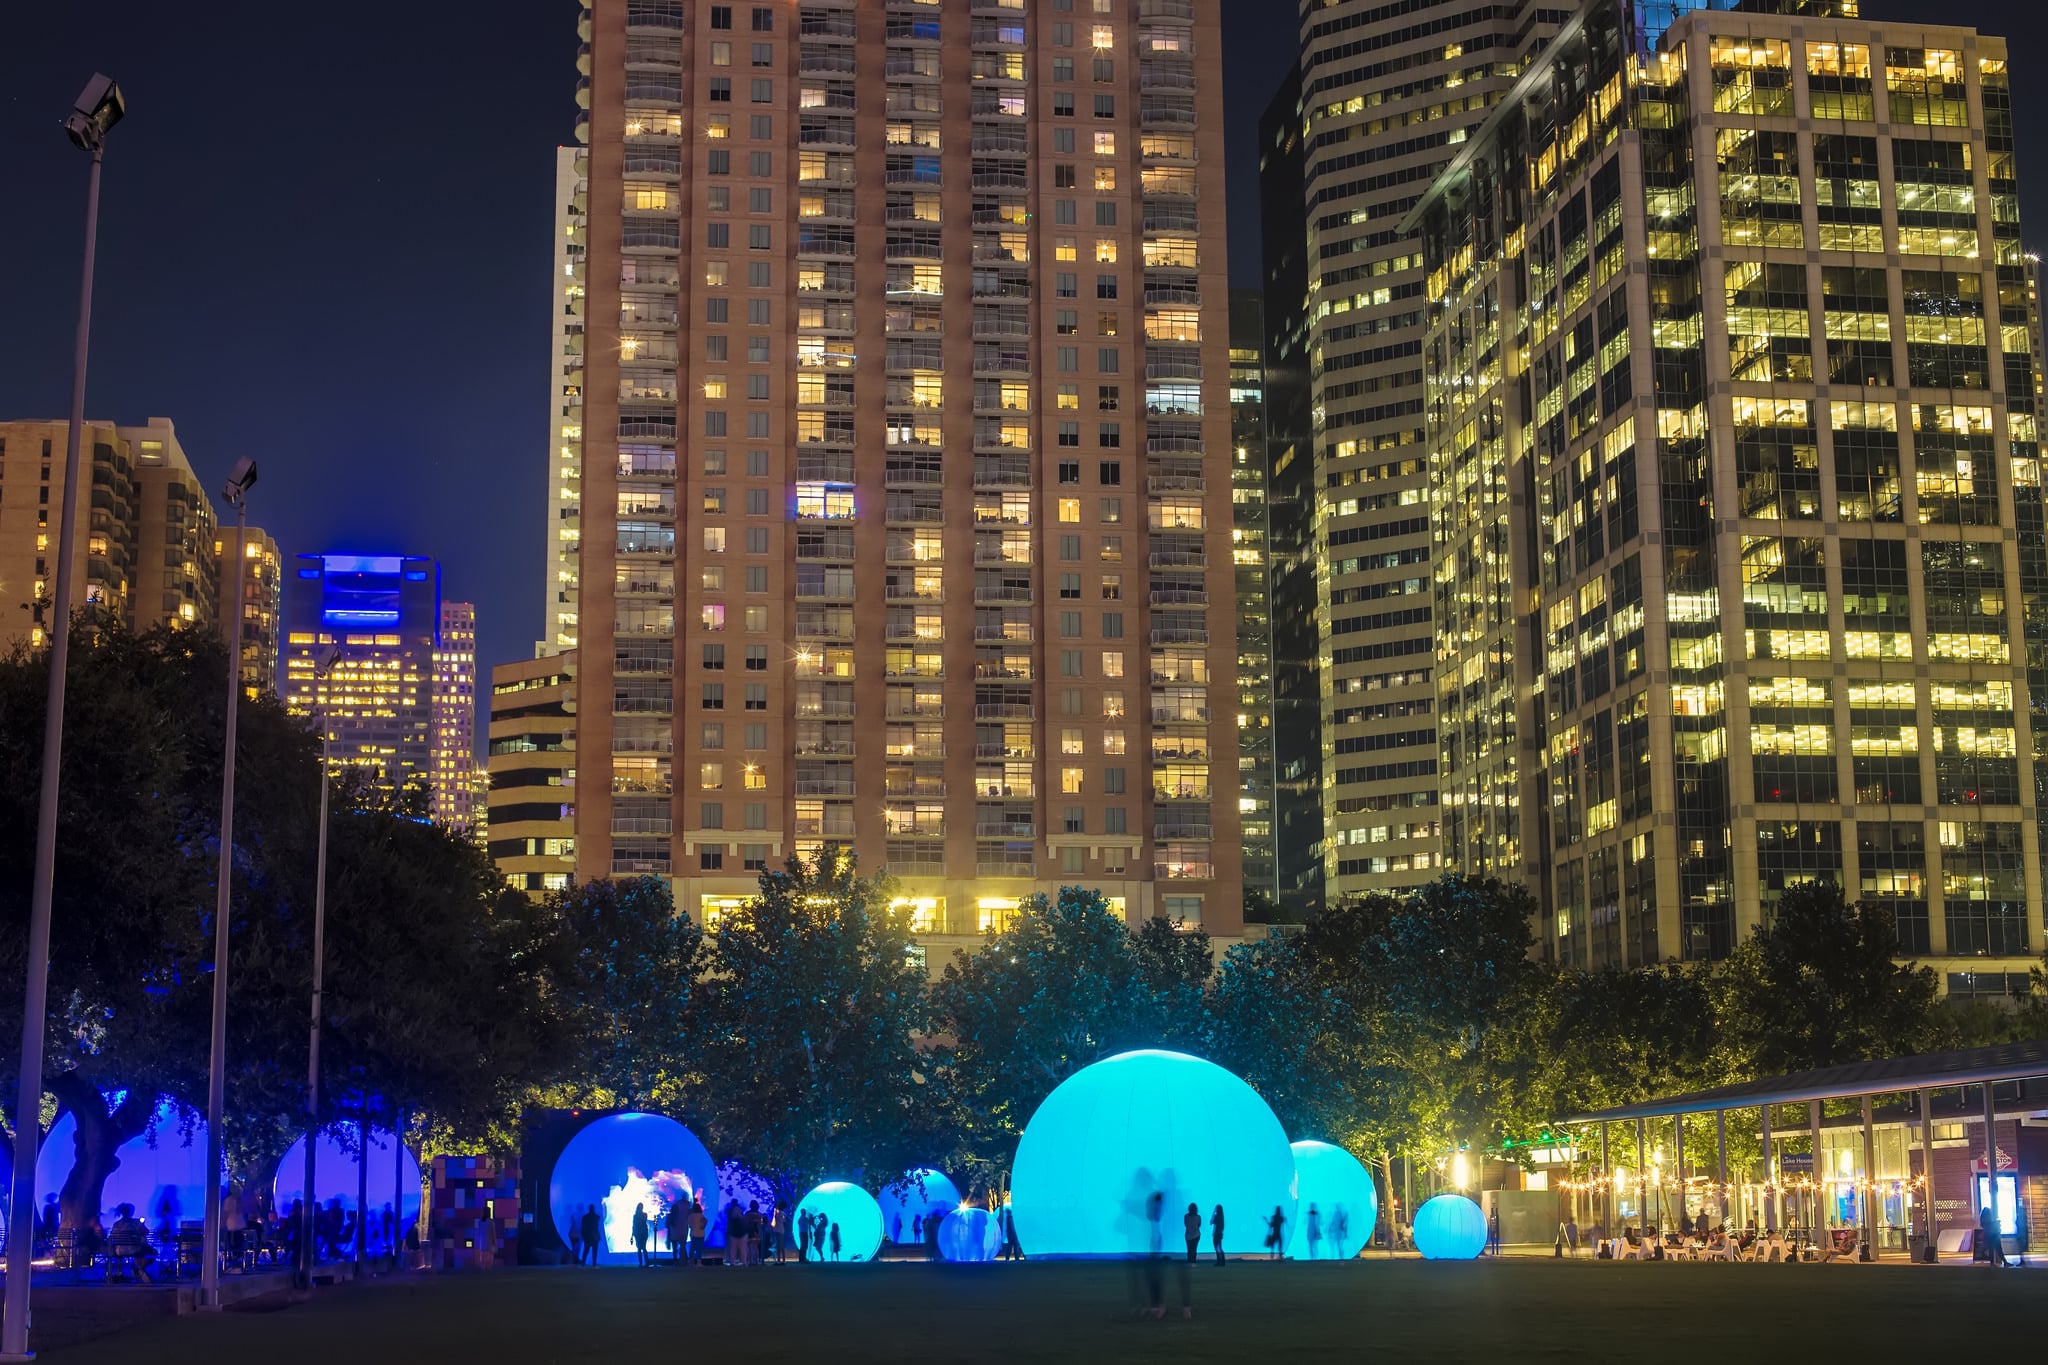 A Decade of Discovery-Temporary Art Exhibits at Discovery Green®